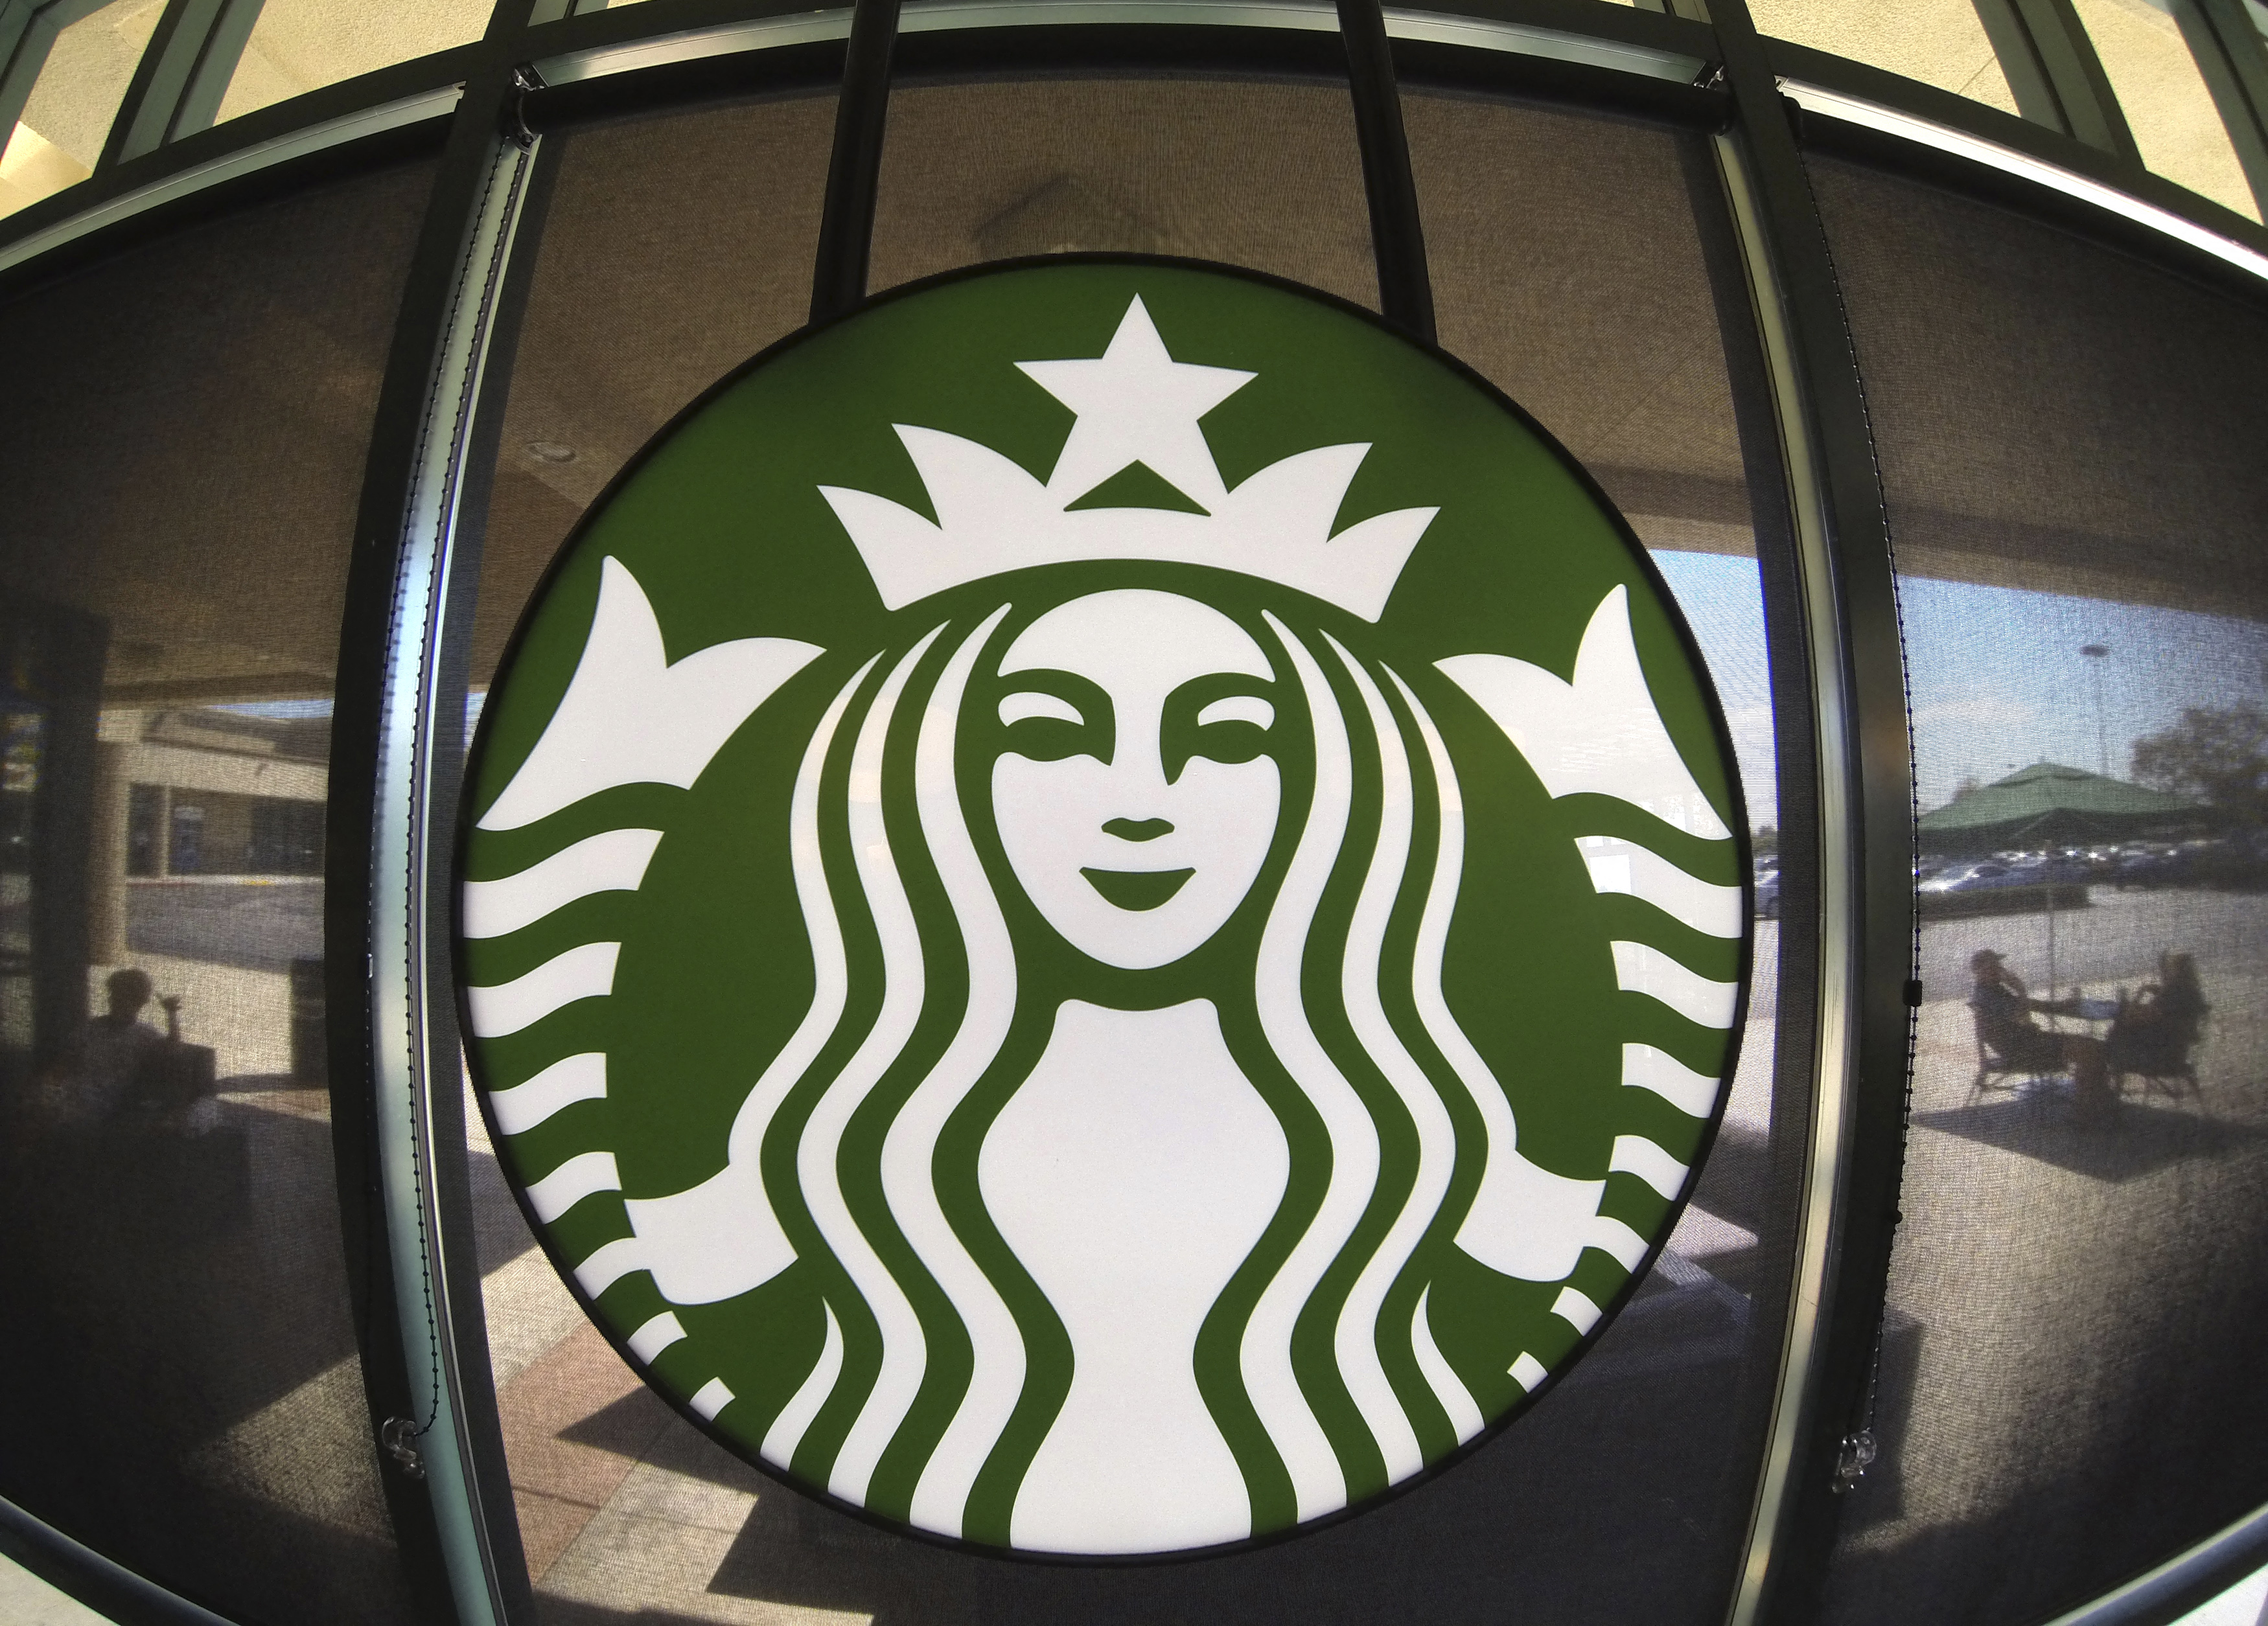 The Starbucks logo hangs on a window inside a newly designed Starbucks coffee shop in Fountain Valley, Californi